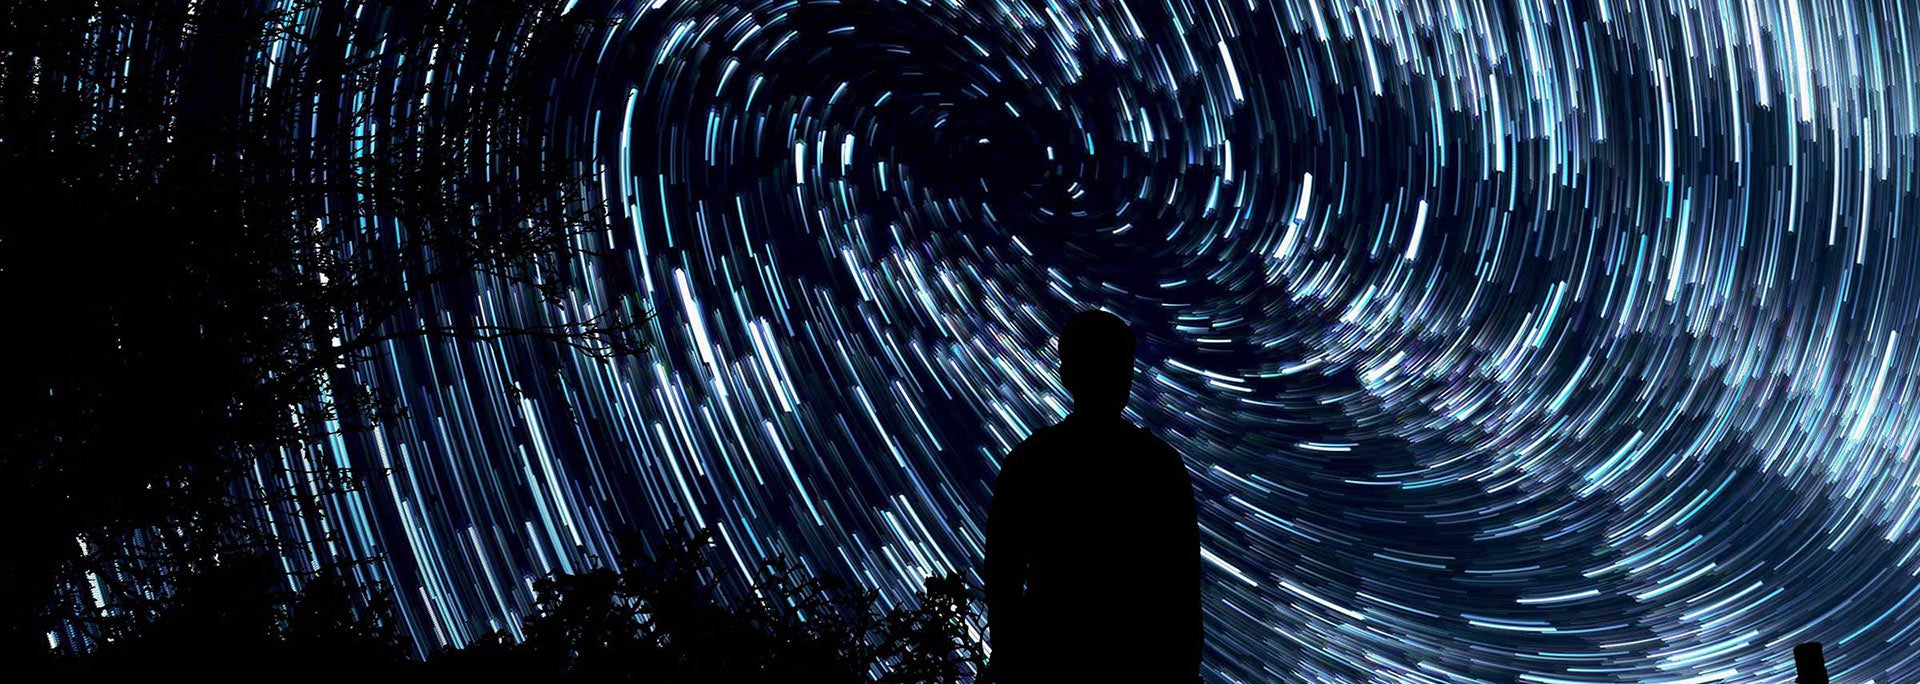 silhouette of a person standing against a starry sky